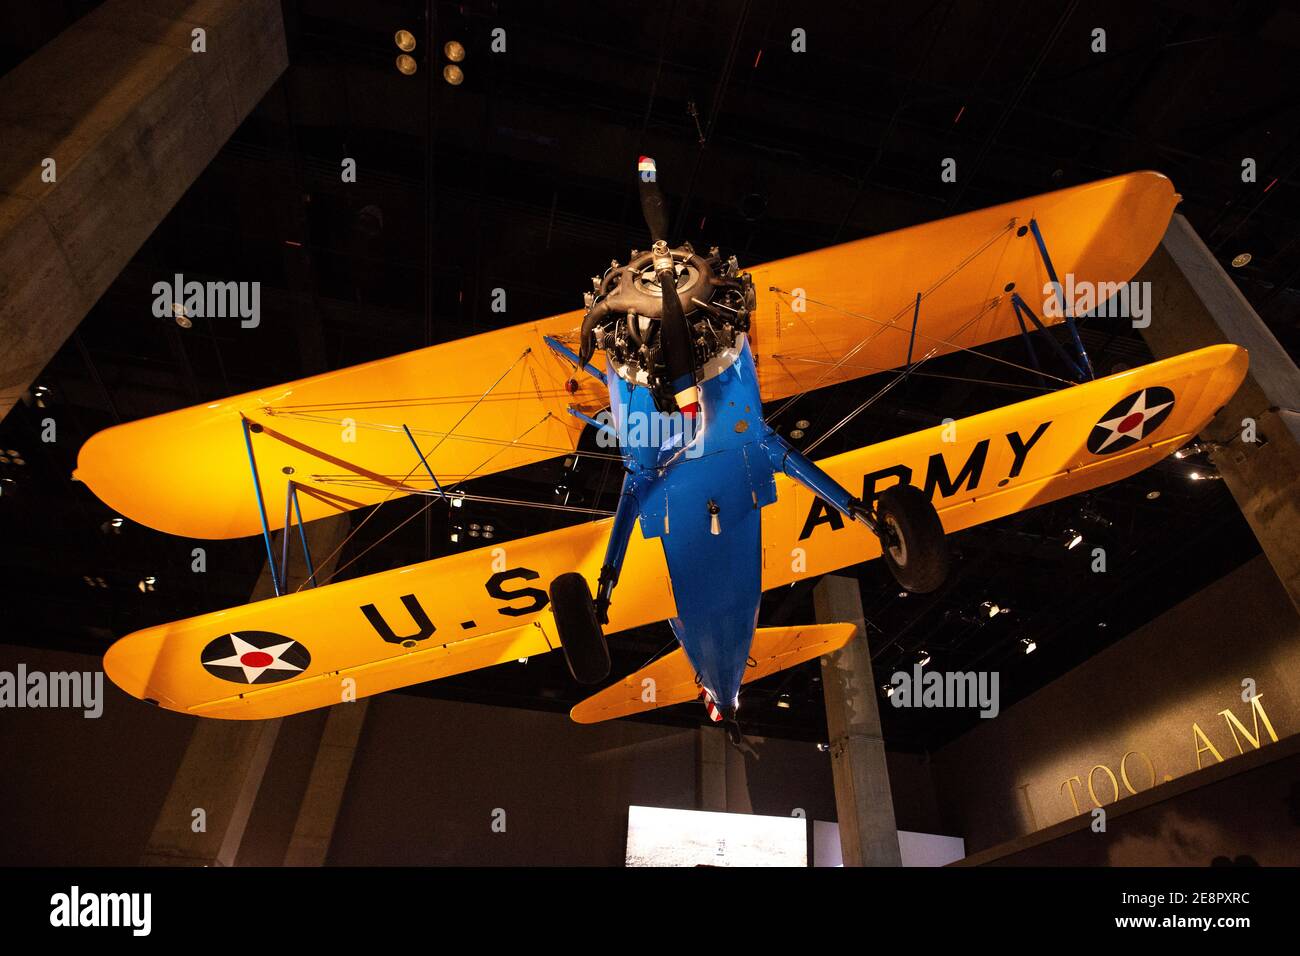 The Spirit of Tuskegee, a biplane flown by the Tuskegee Airmen, hanging at the National Museum of African American History & Culture in Washington DC. Stock Photo